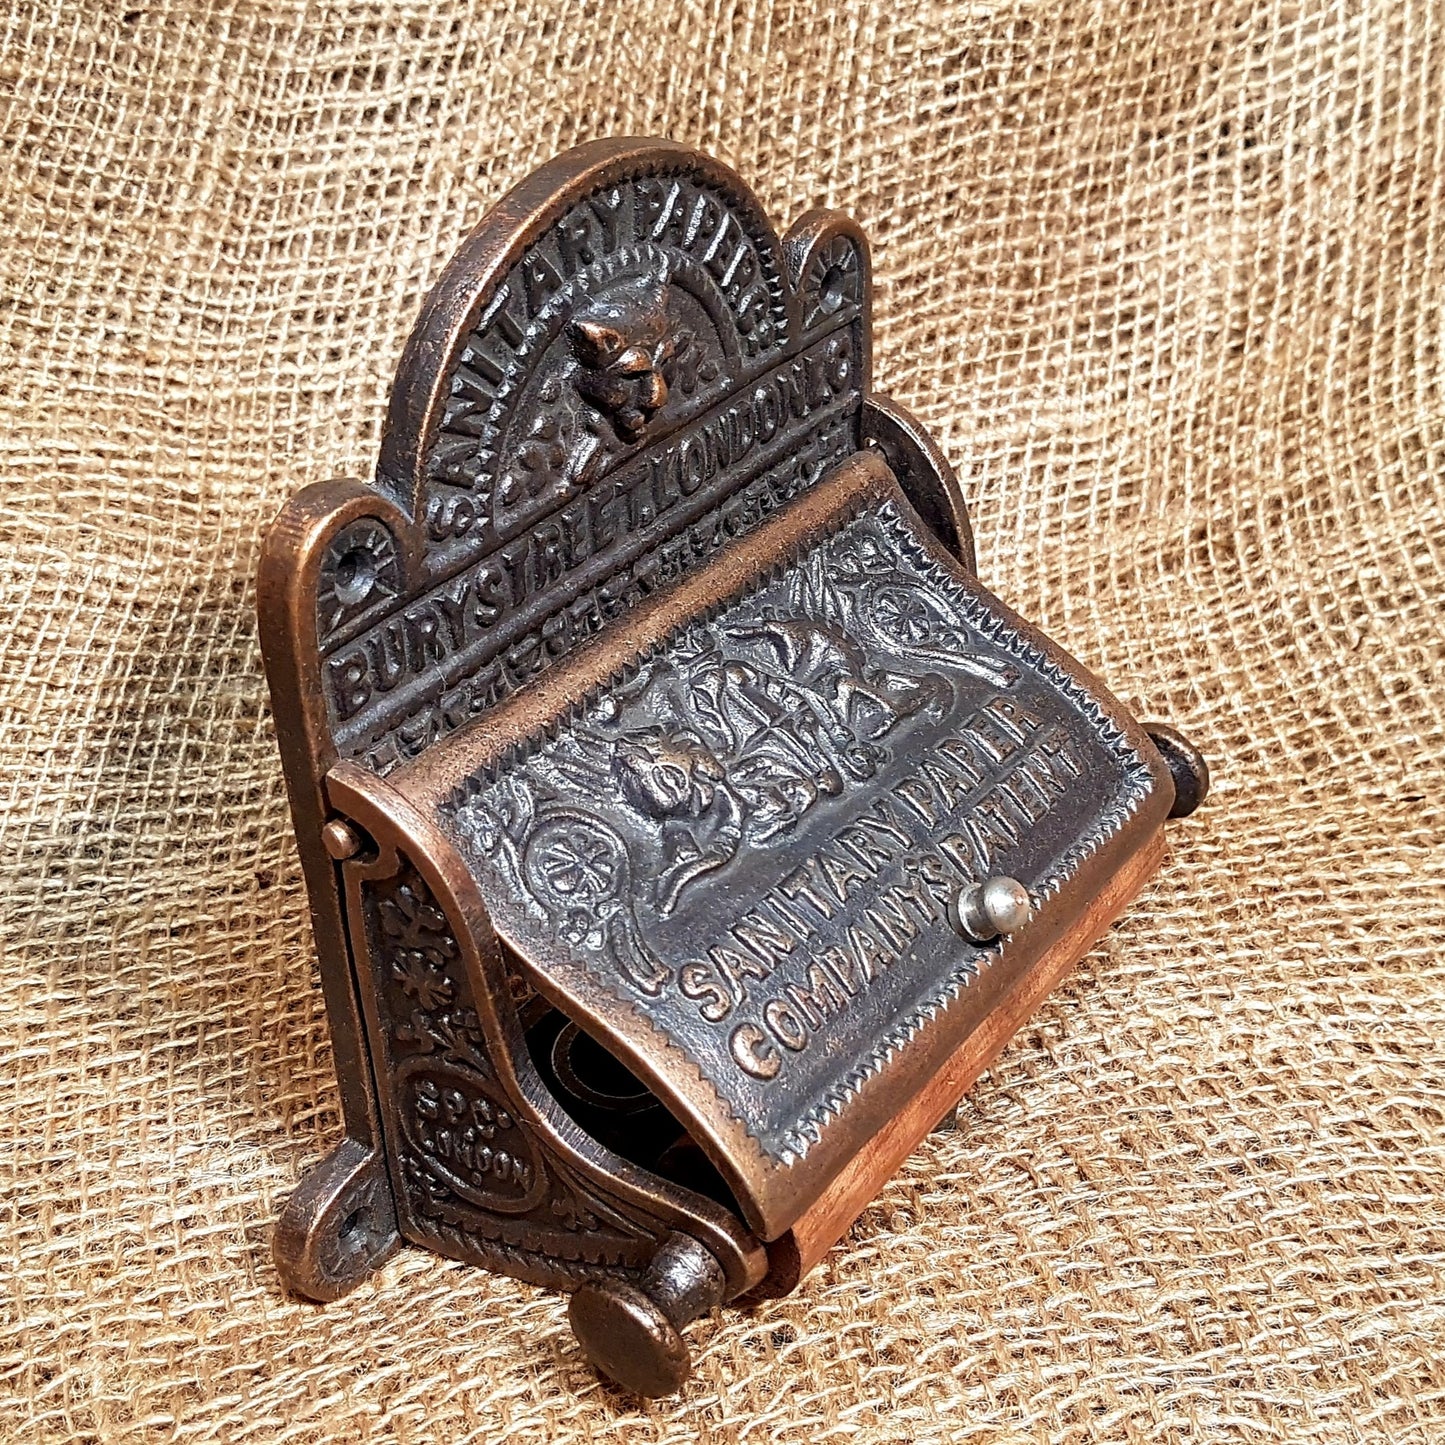 Bury St London Antique Copper Toilet Paper Holder - Spearhead Collection - Toilet Paper Holders - Bathroom Decor, Copper, Home Decor, Made in England, Toilet Paper Holders, Victorian